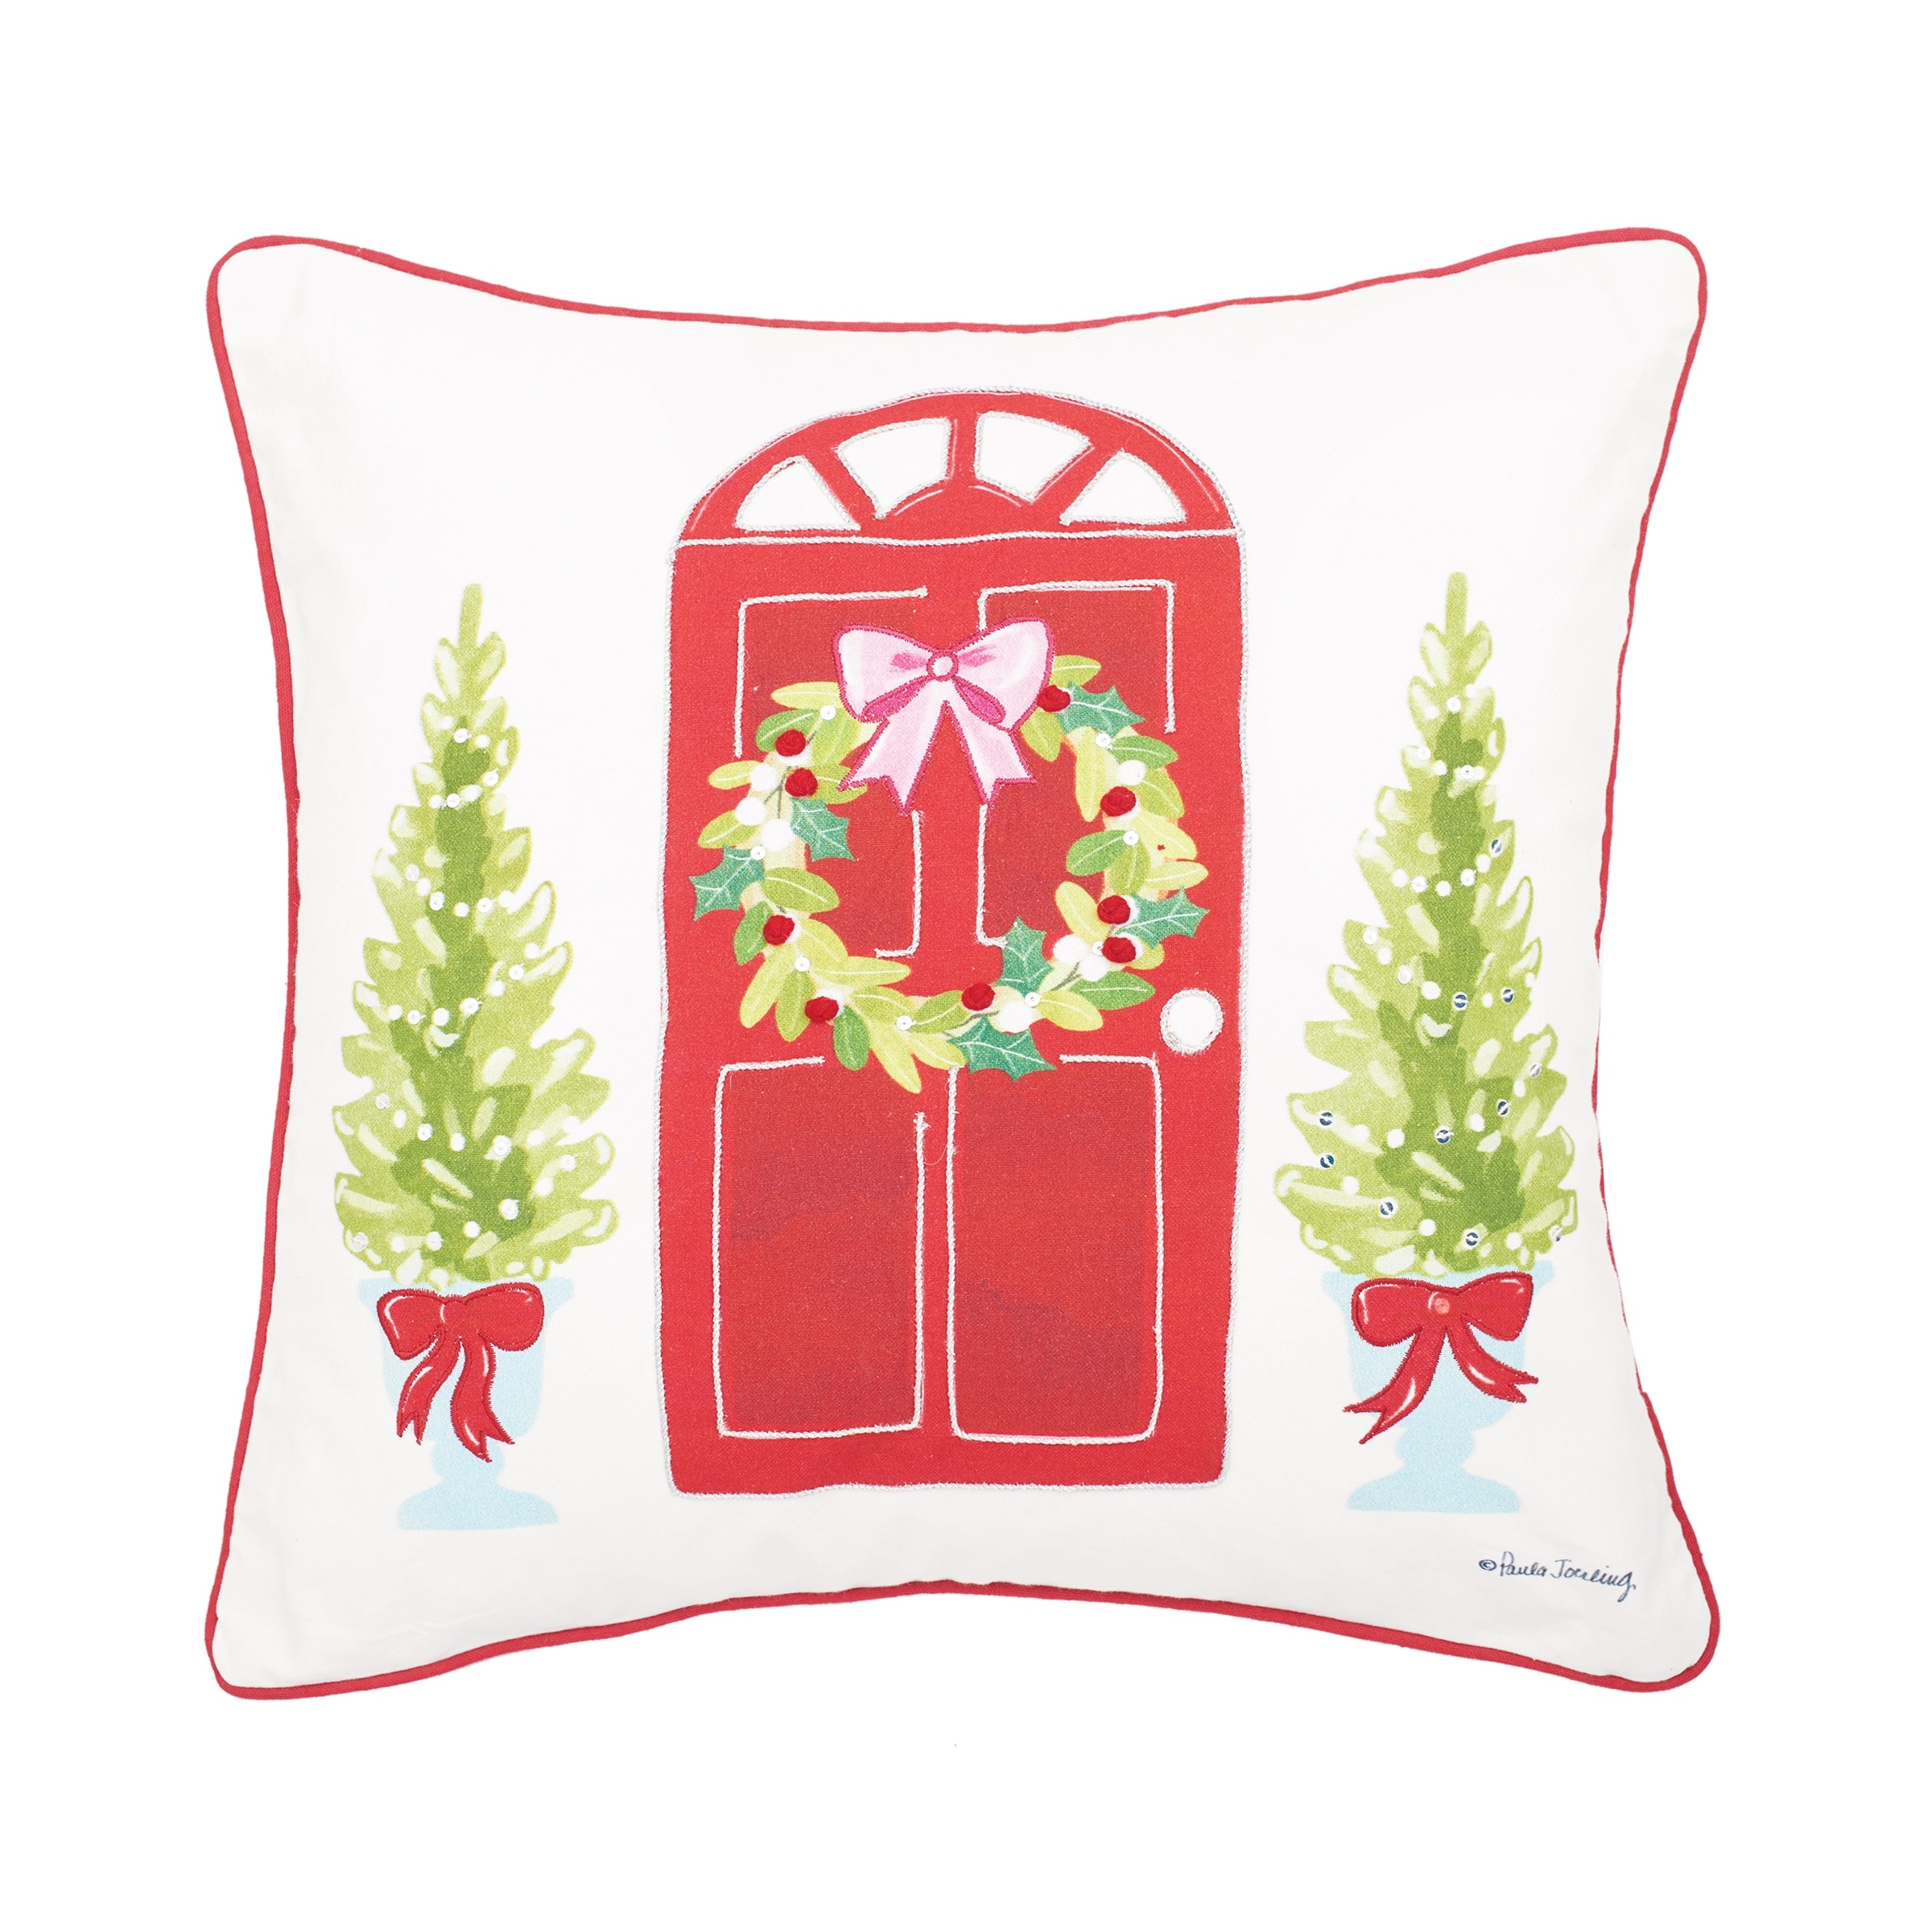 https://ak1.ostkcdn.com/images/products/is/images/direct/40a5e232020ccb974a44b4326b5fc9652bd0594f/Door-Wreath-Printed-%26-Embellished-Throw-Pillow.jpg